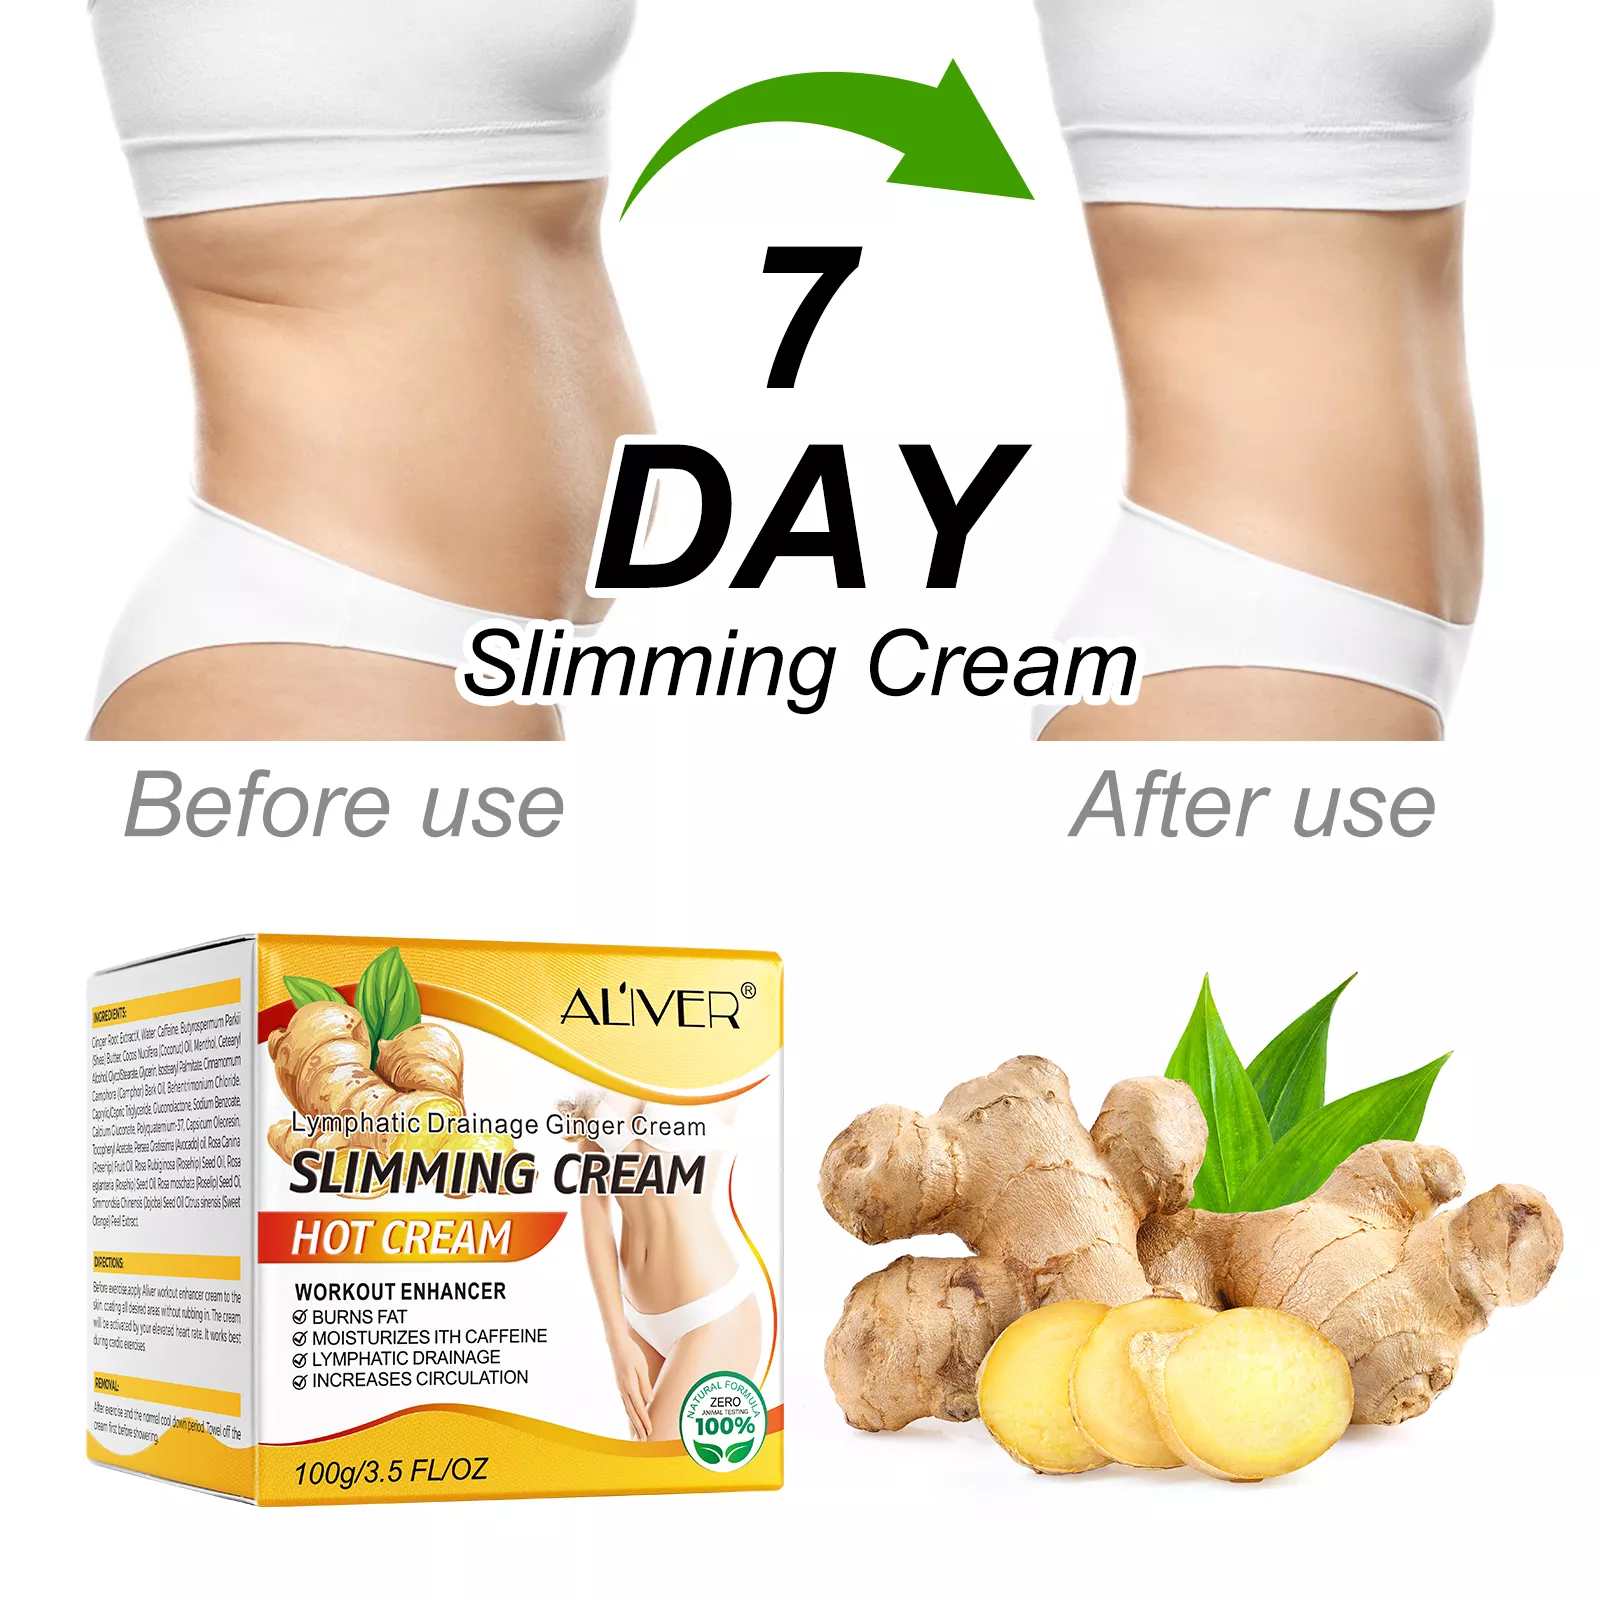 Aliver 100g Ginger Slimming Cream Hot Cream Fat Burner Slimming Body Anti Cellulite Burning Firming Weight Loss